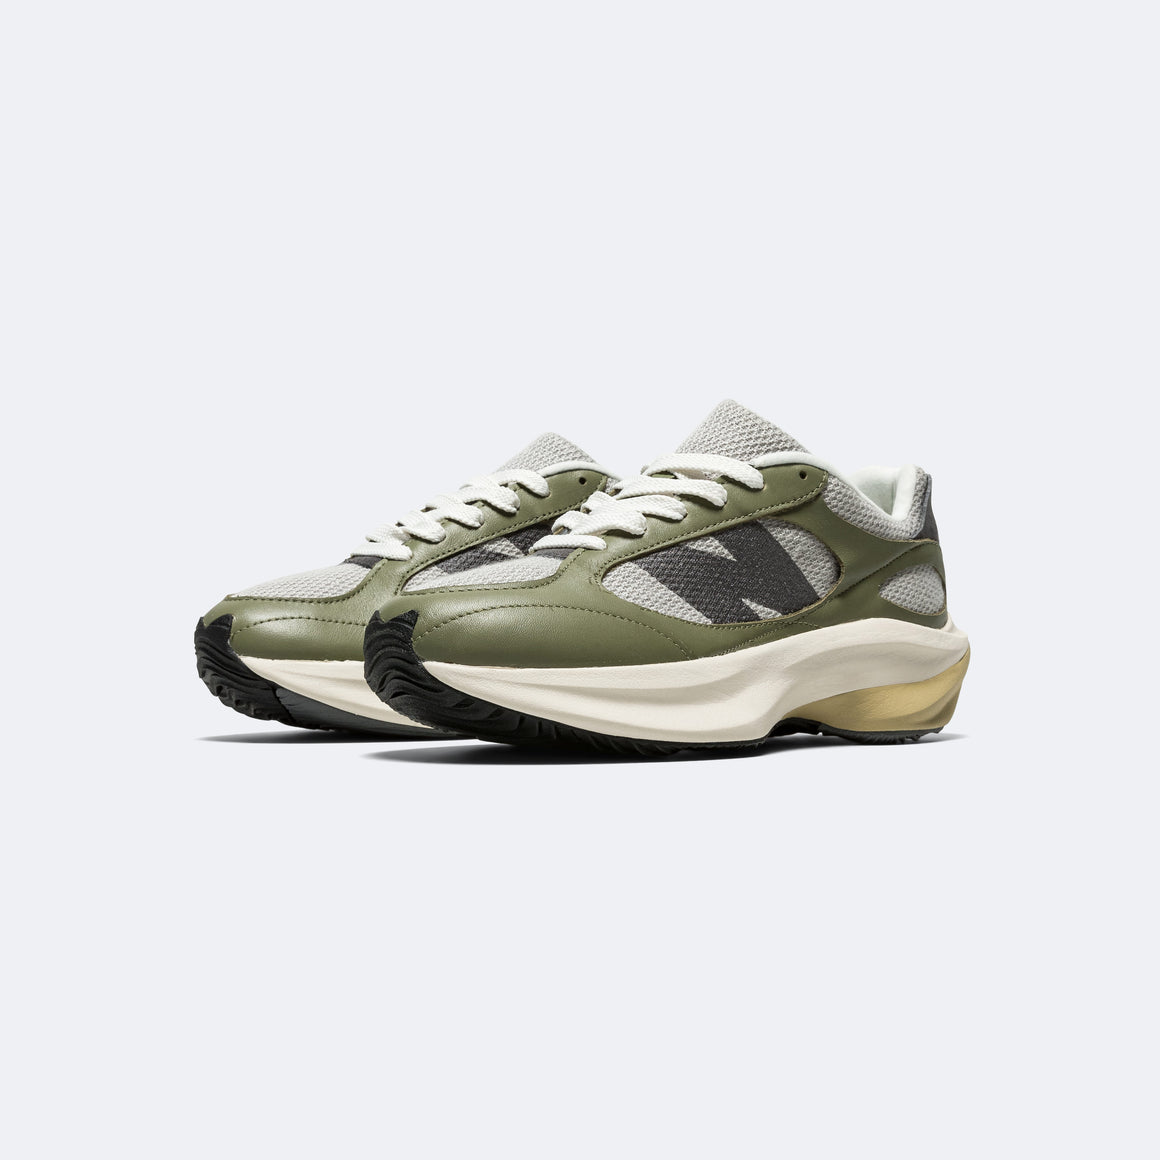 WRPD RUNNER 'Leather Pack' - Olive